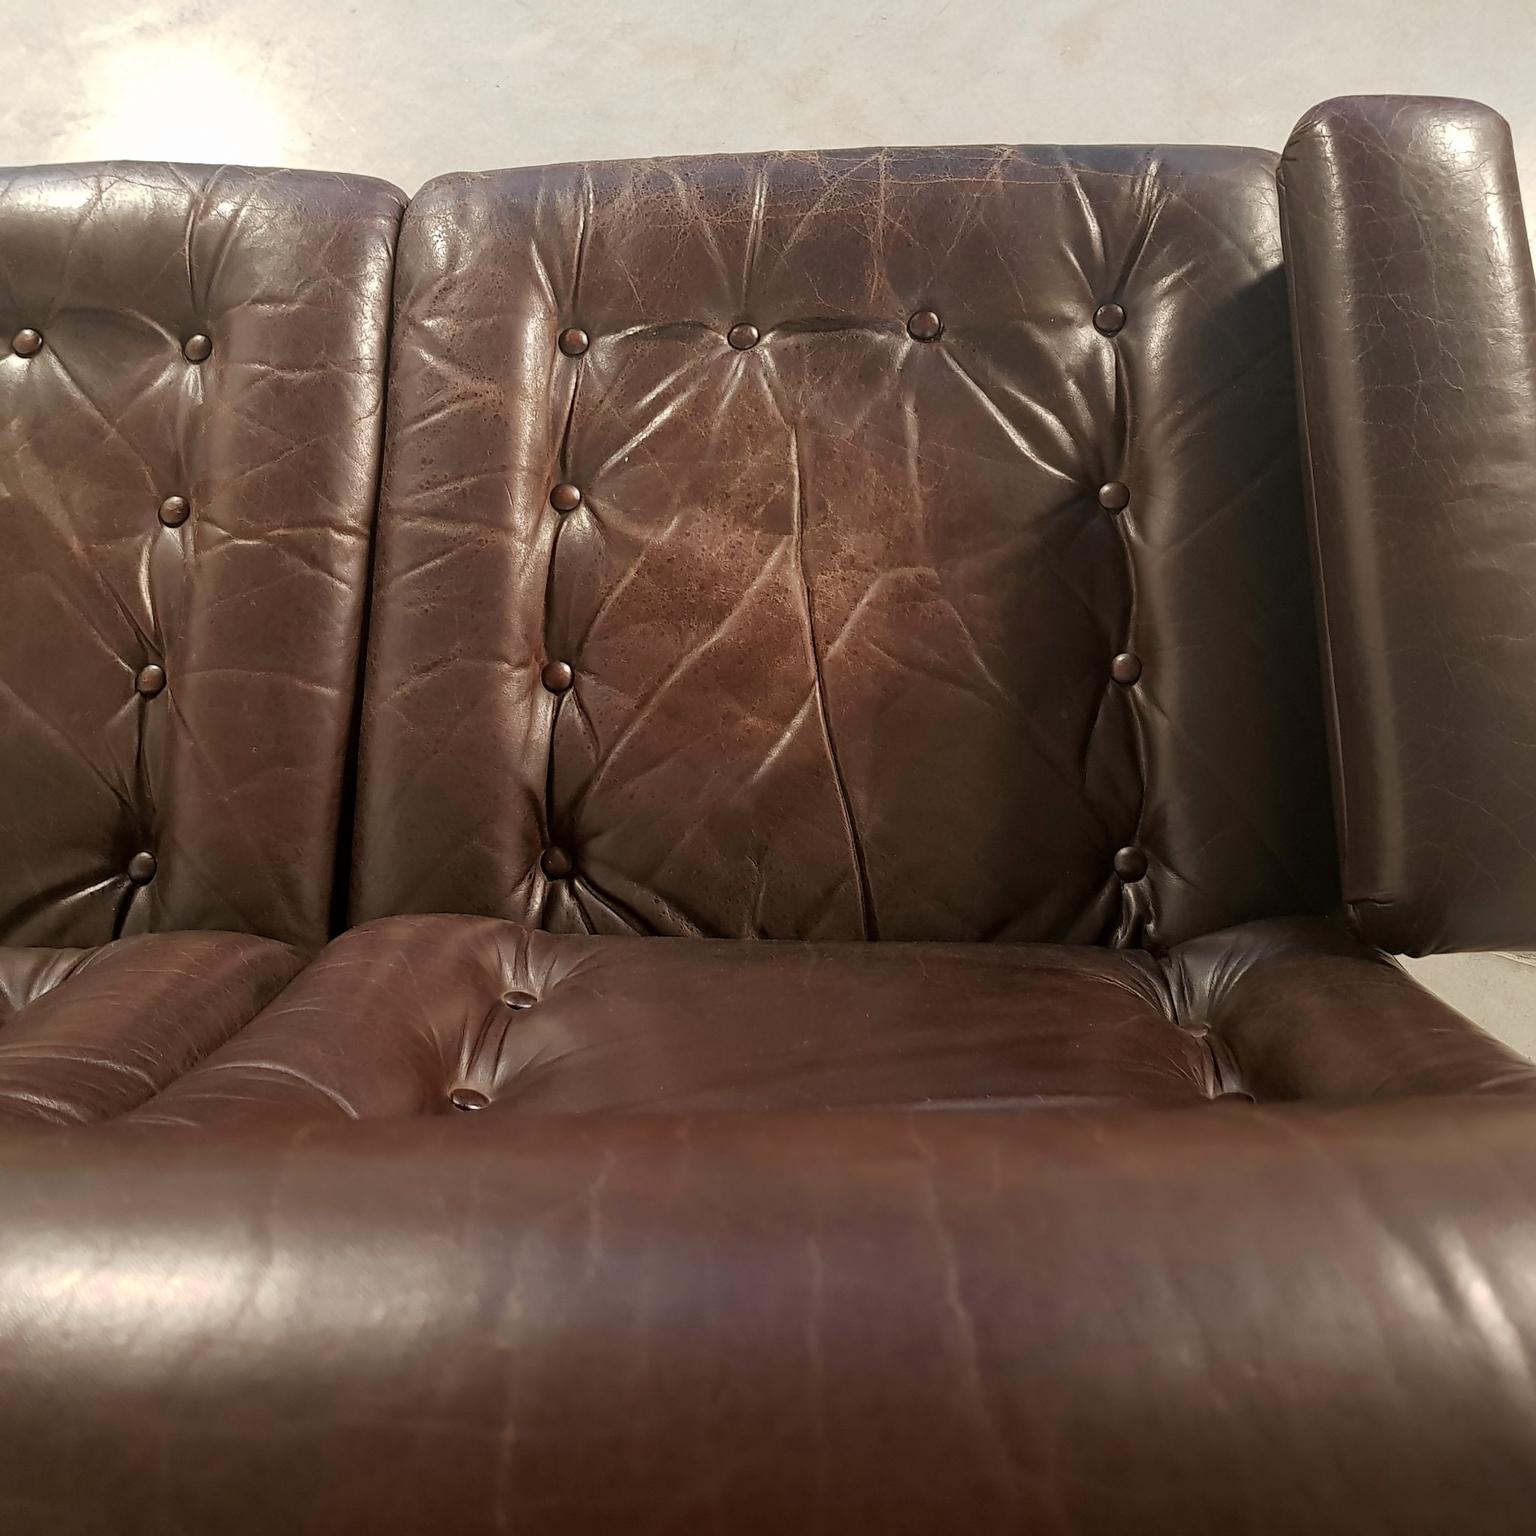 Midcentury Leather Sofa with Chrome Legs, France, 1970s For Sale 2